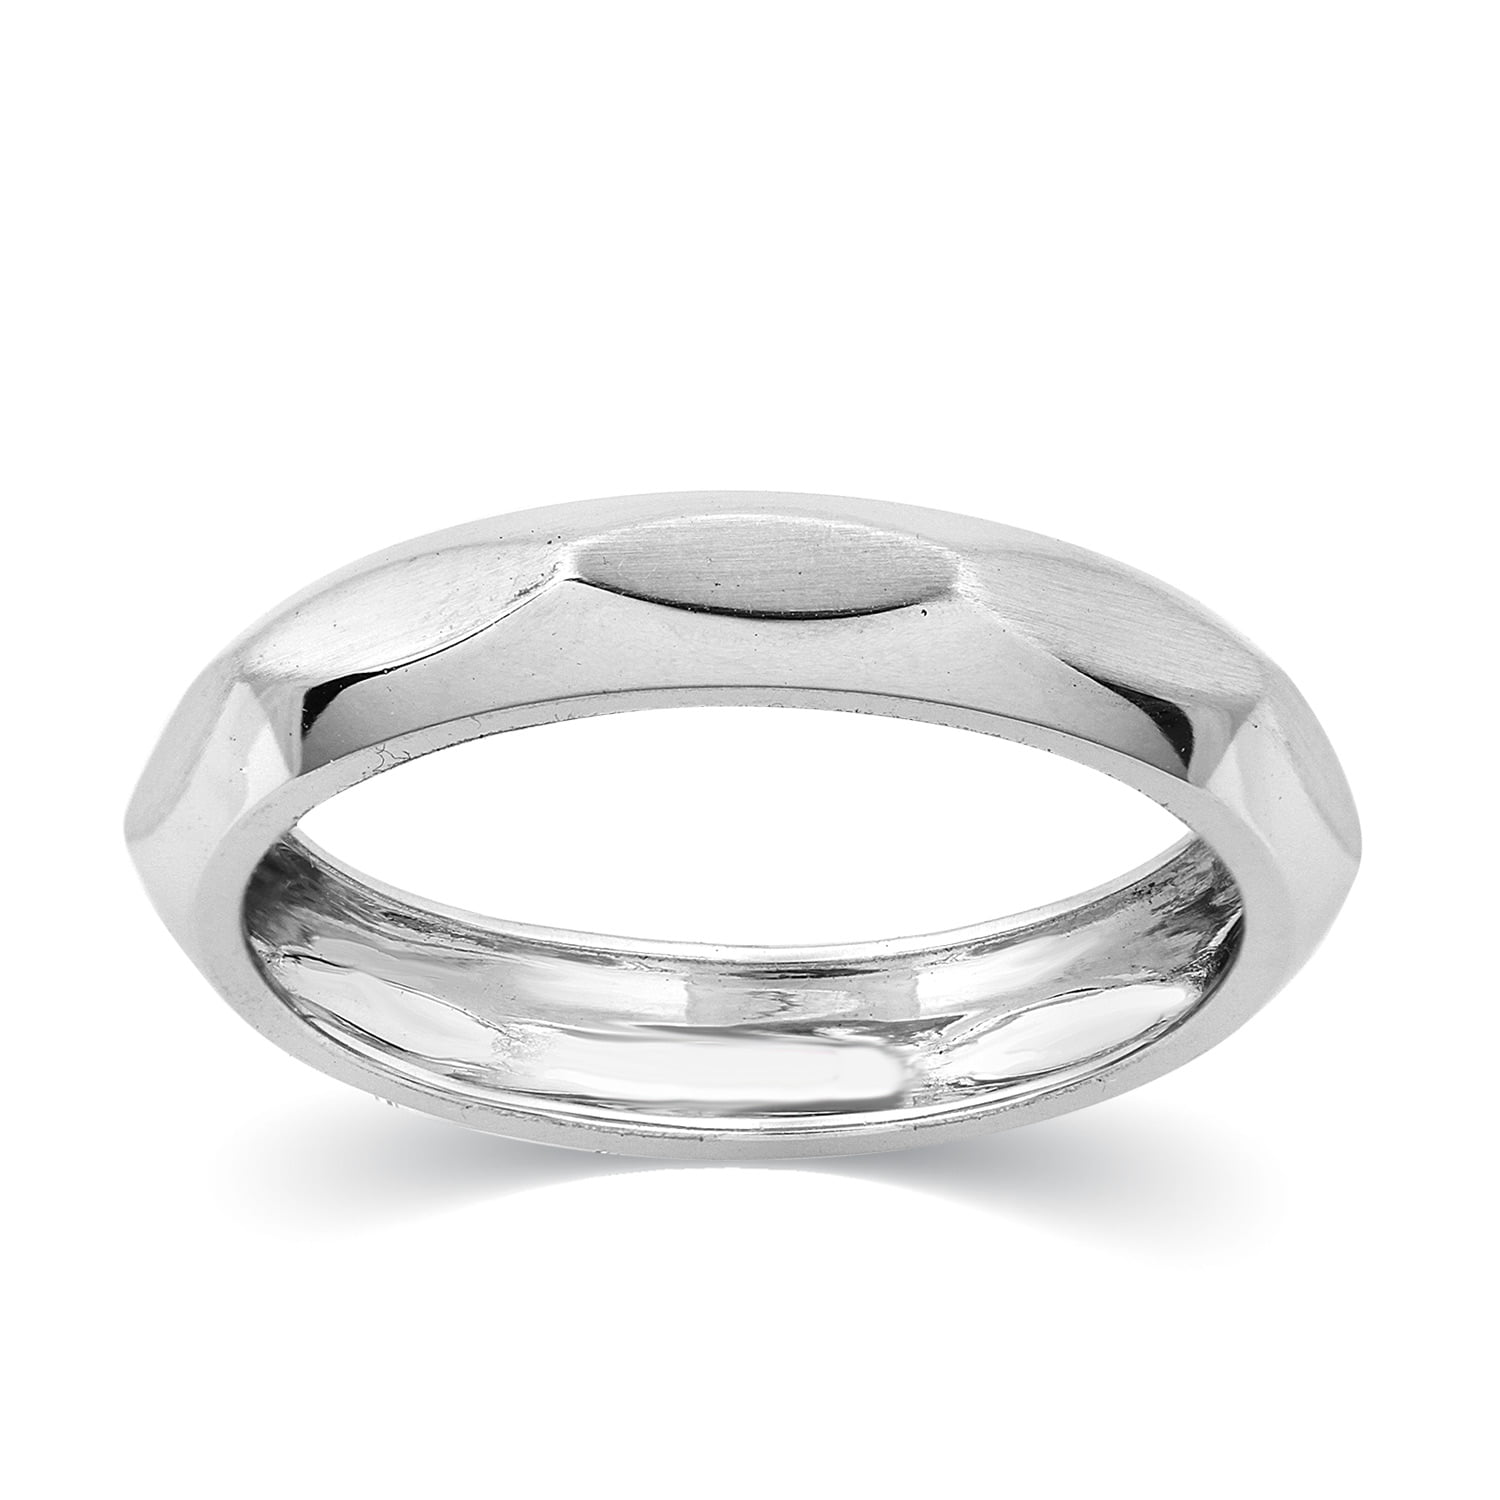 14k White Gold 1mm Polished Comfort Fit Band Ring Size 6.5 Jewelry Gifts for Women